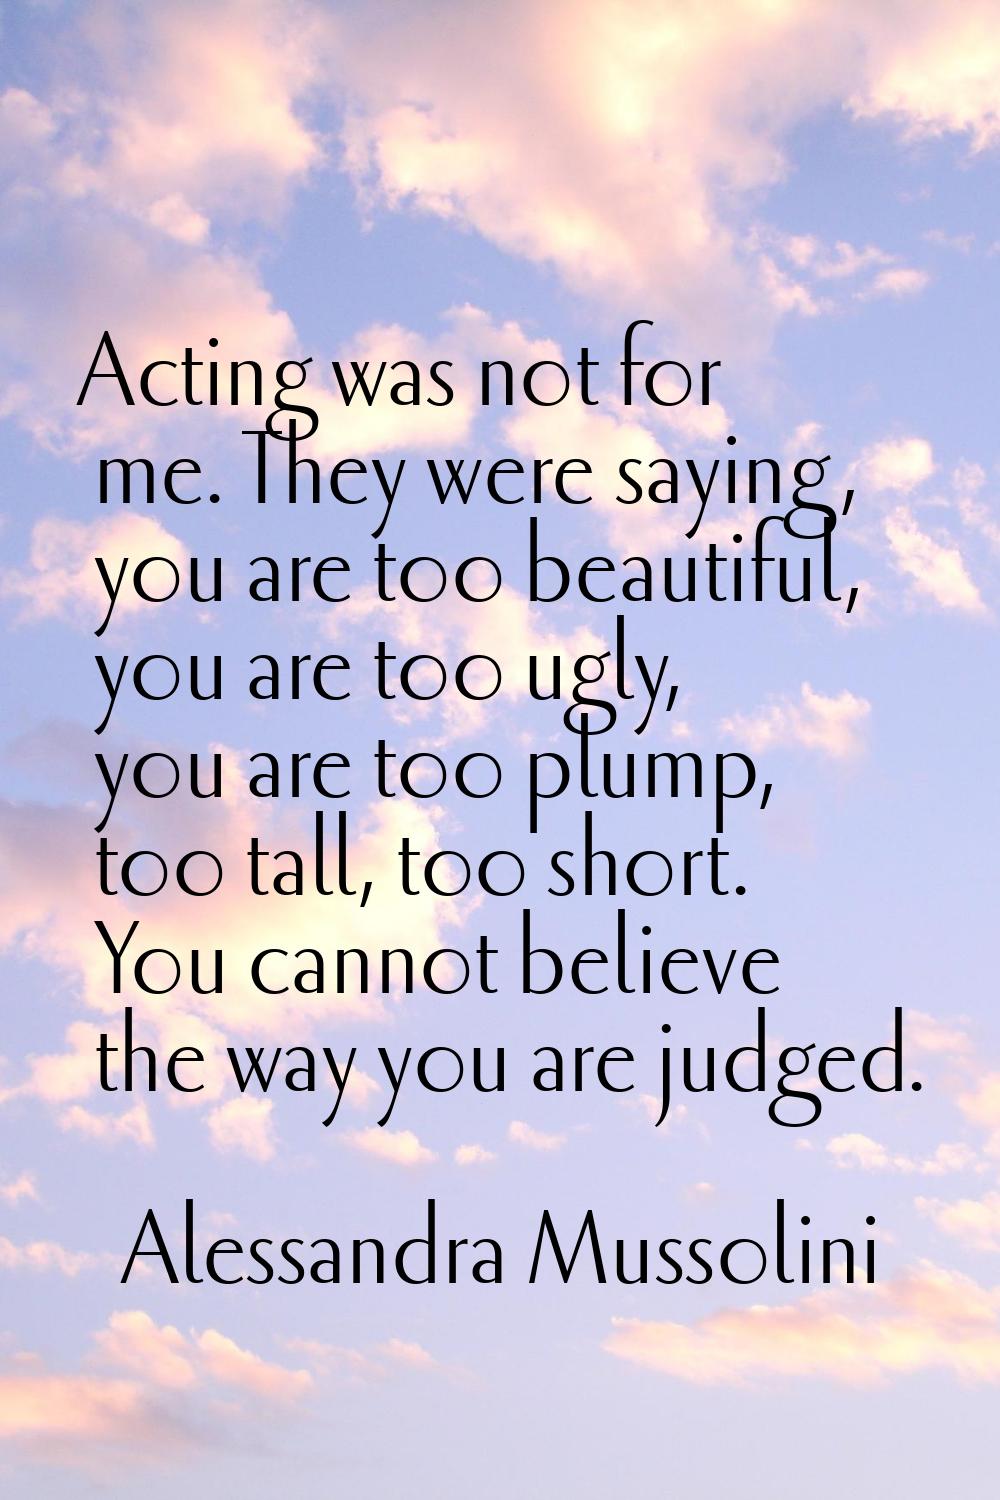 Acting was not for me. They were saying, you are too beautiful, you are too ugly, you are too plump